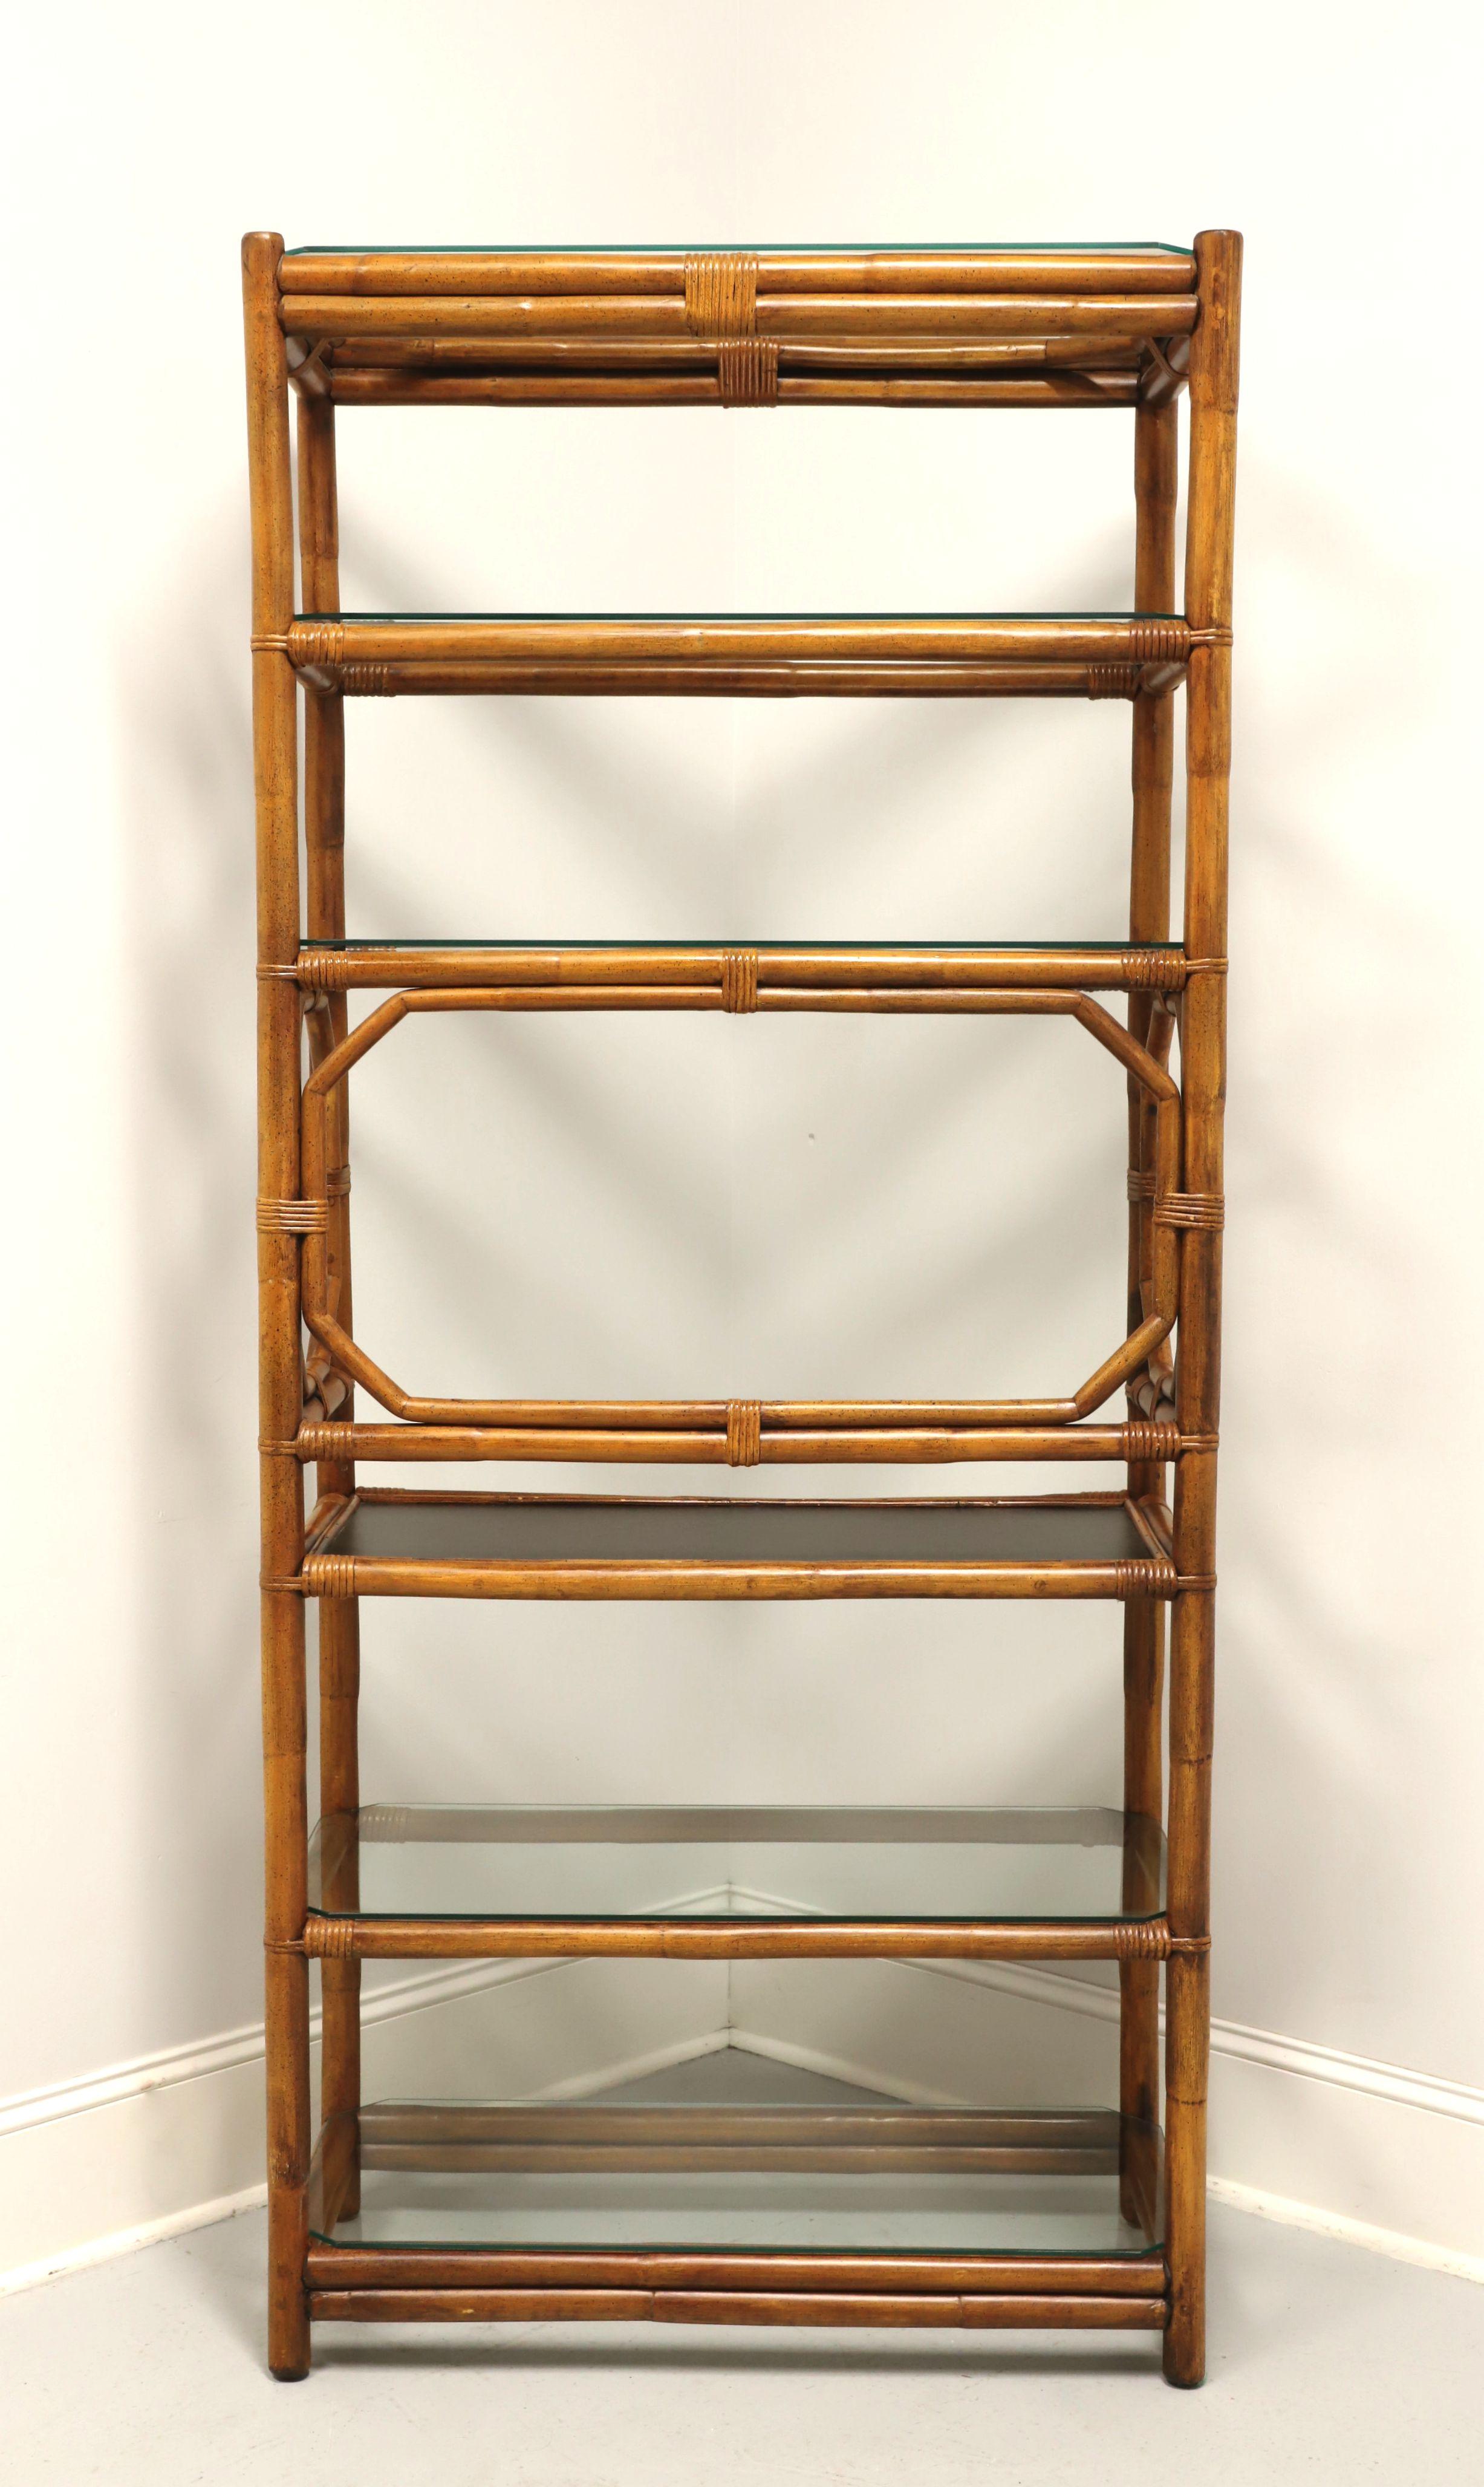 American FICKS REED Mid 20th Century Faux Bamboo Rattan Etagere Display Shelving Unit